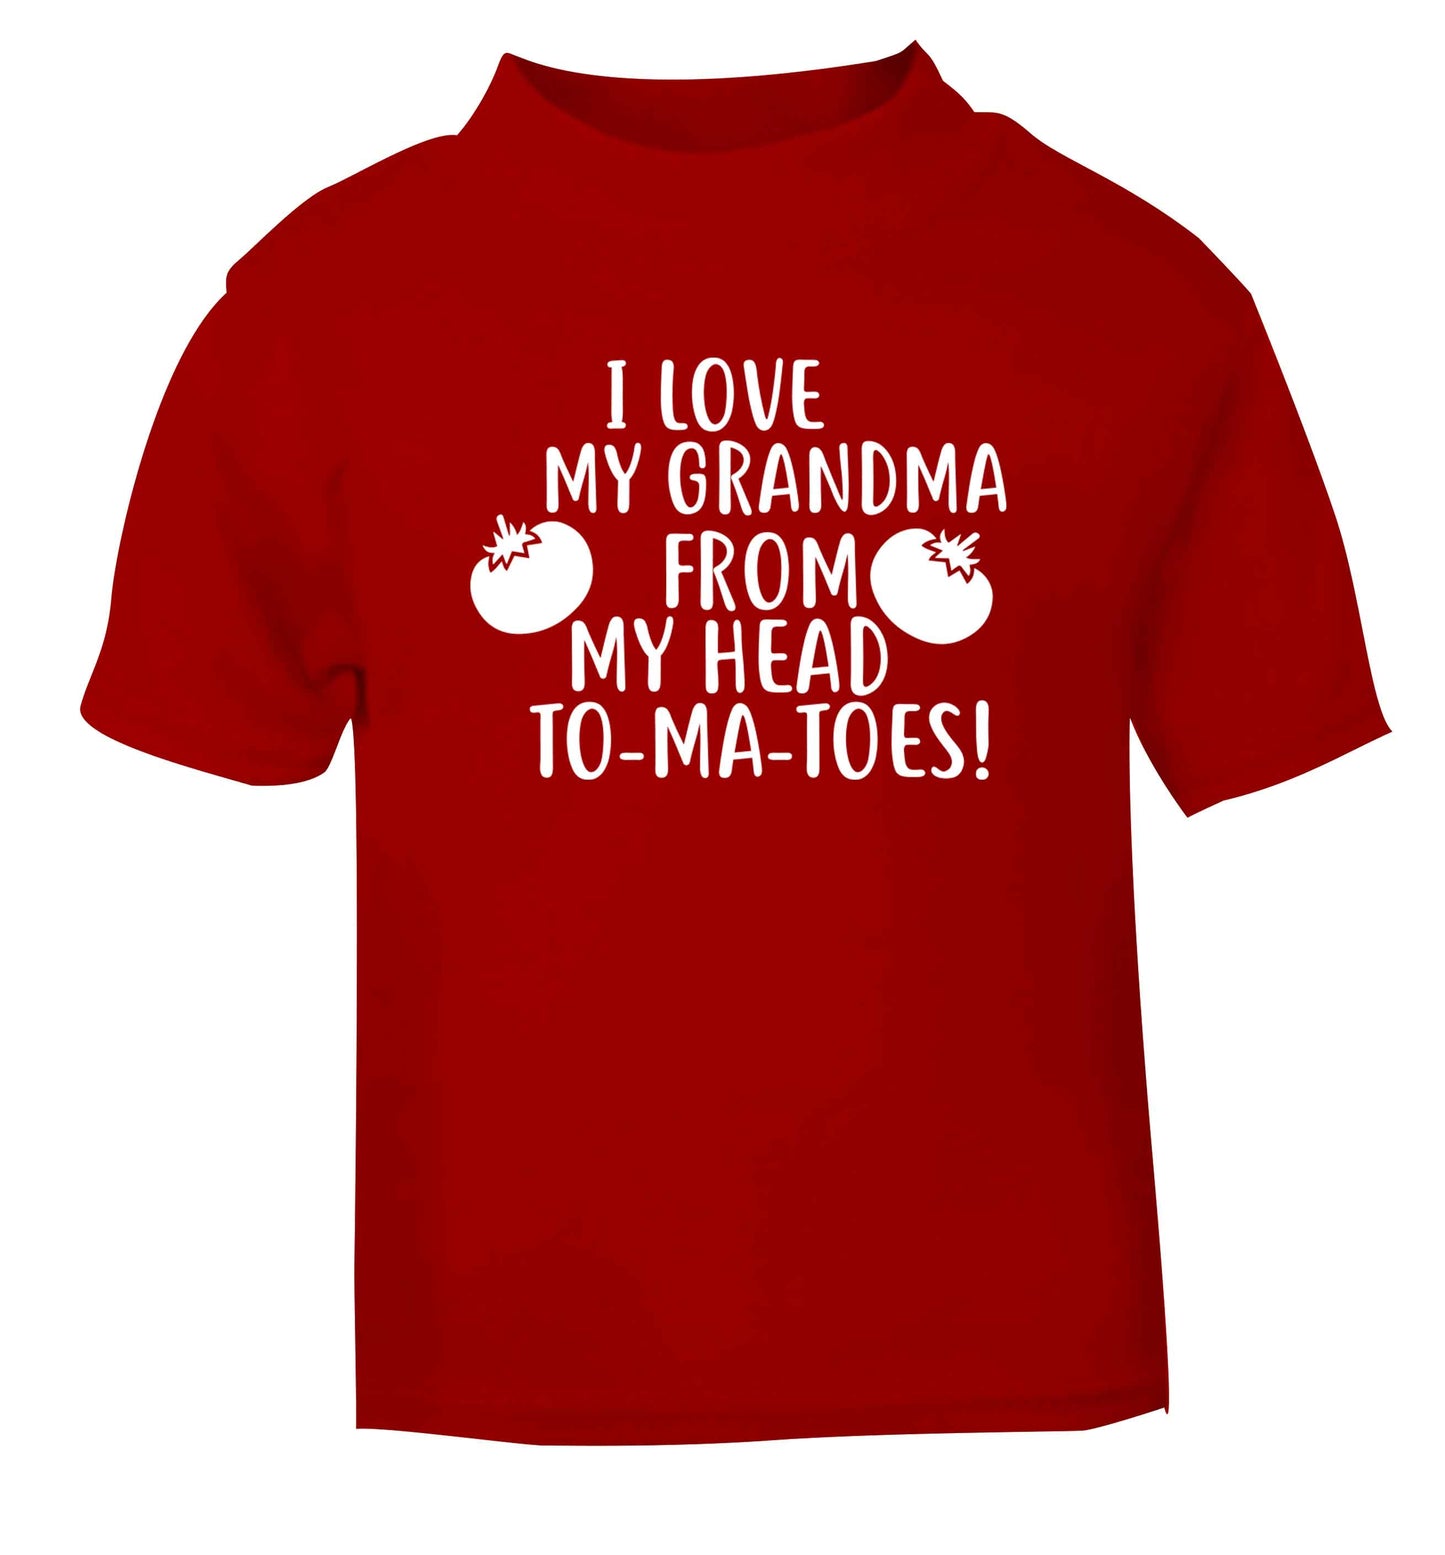 I love my grandma from my head to-ma-toes red Baby Toddler Tshirt 2 Years